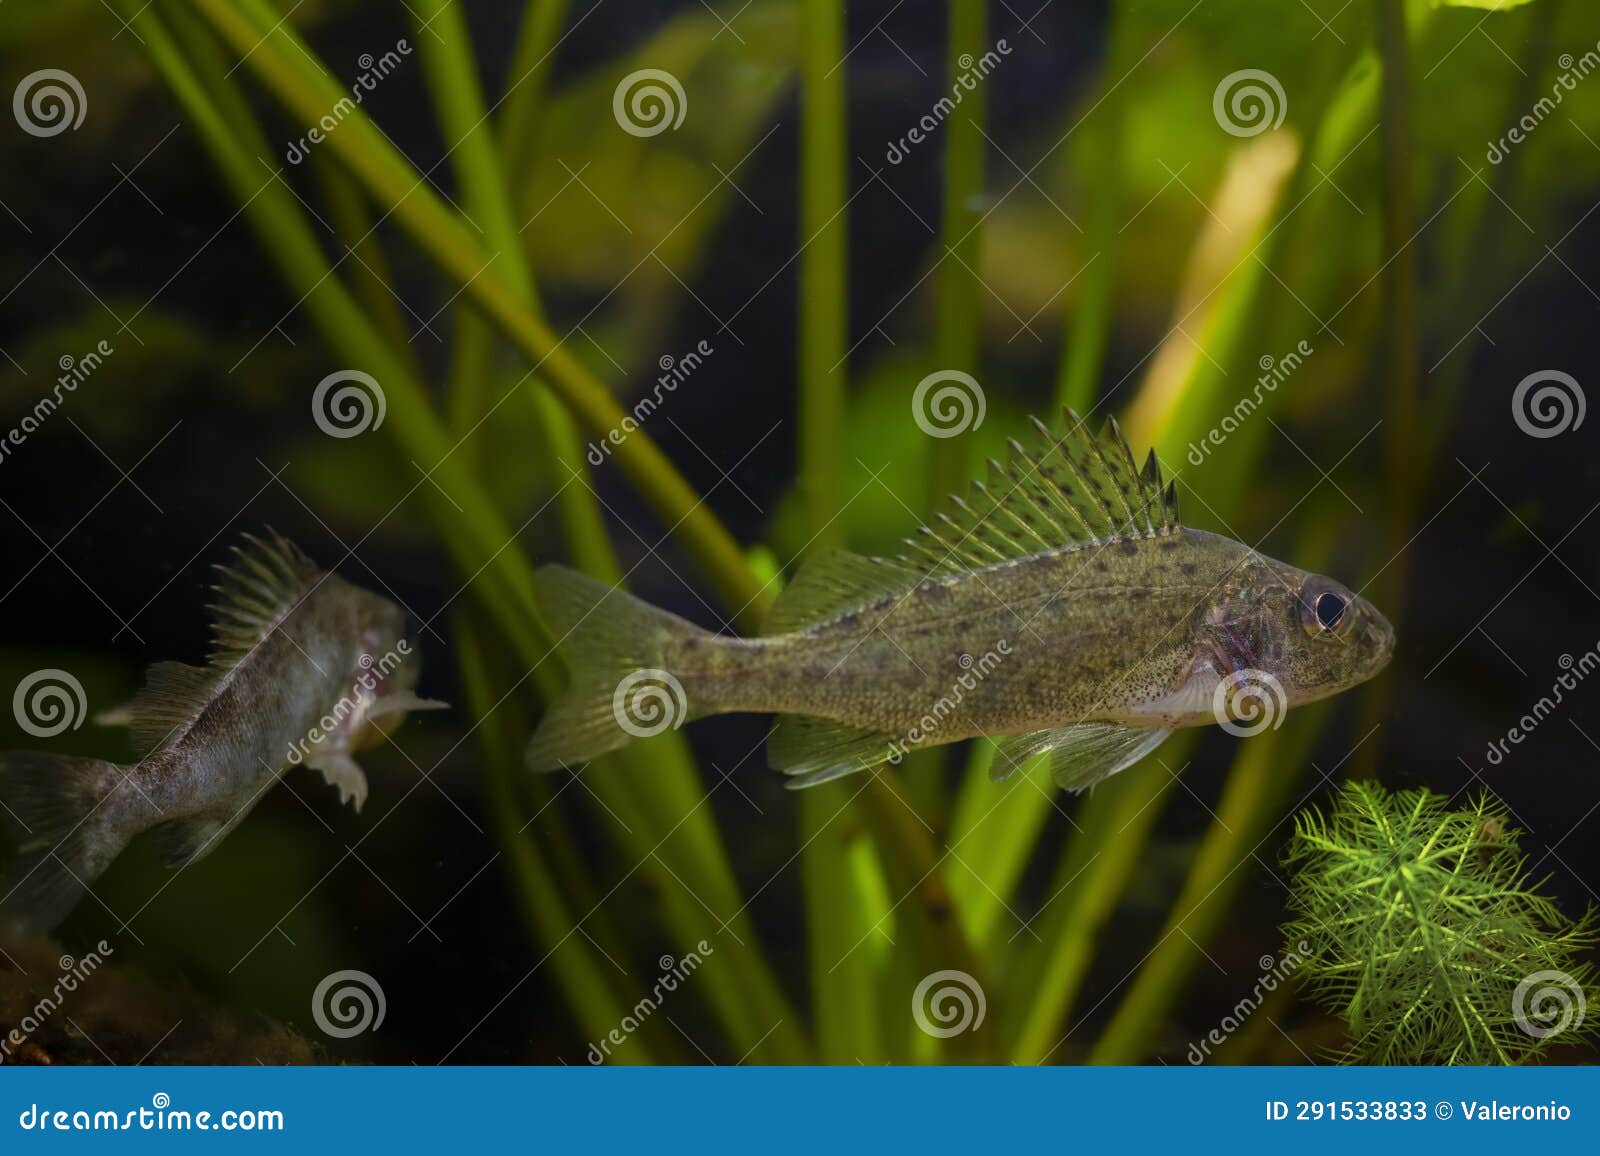 aggressive captive eurasian ruffe, dominant and submissive wild small freshwater fish, omnivore coldwater species